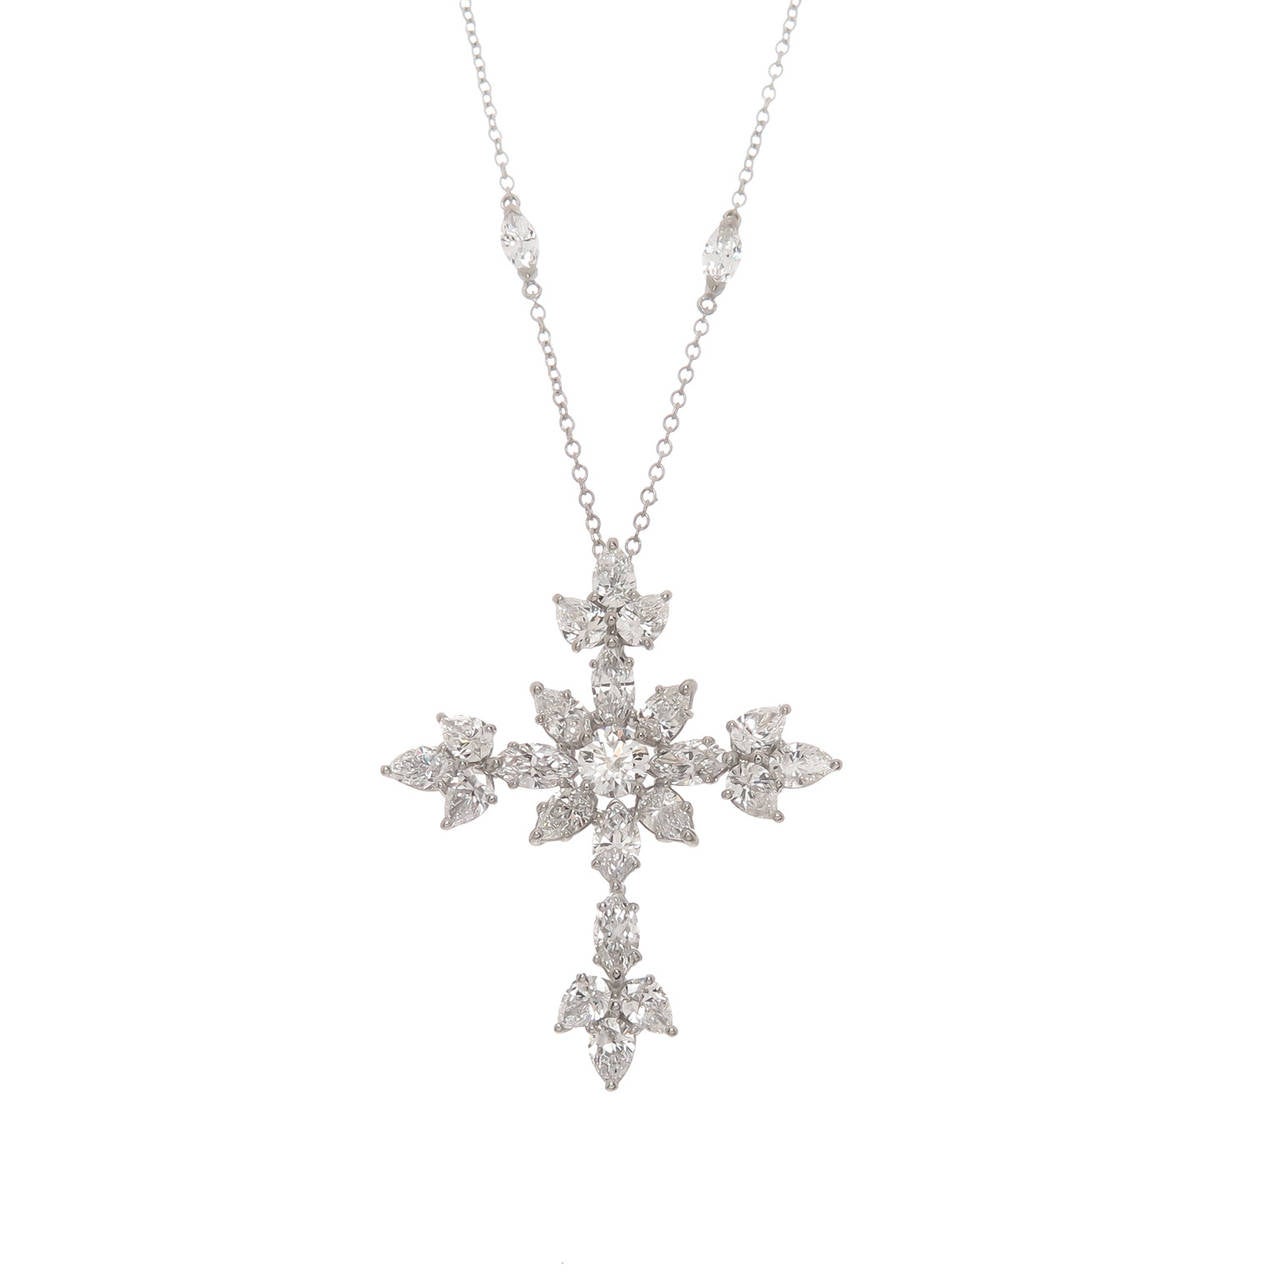 Circa 2014 Harry Winston Platinum mounted Diamond Cross from the Marquise collection. Containing 30 Round, Pear and Marquise shape Diamonds totaling 3.68 Carats, the diamonds all grade as F in Color and VS in Clarity. The cross measures 1 3/8 inch